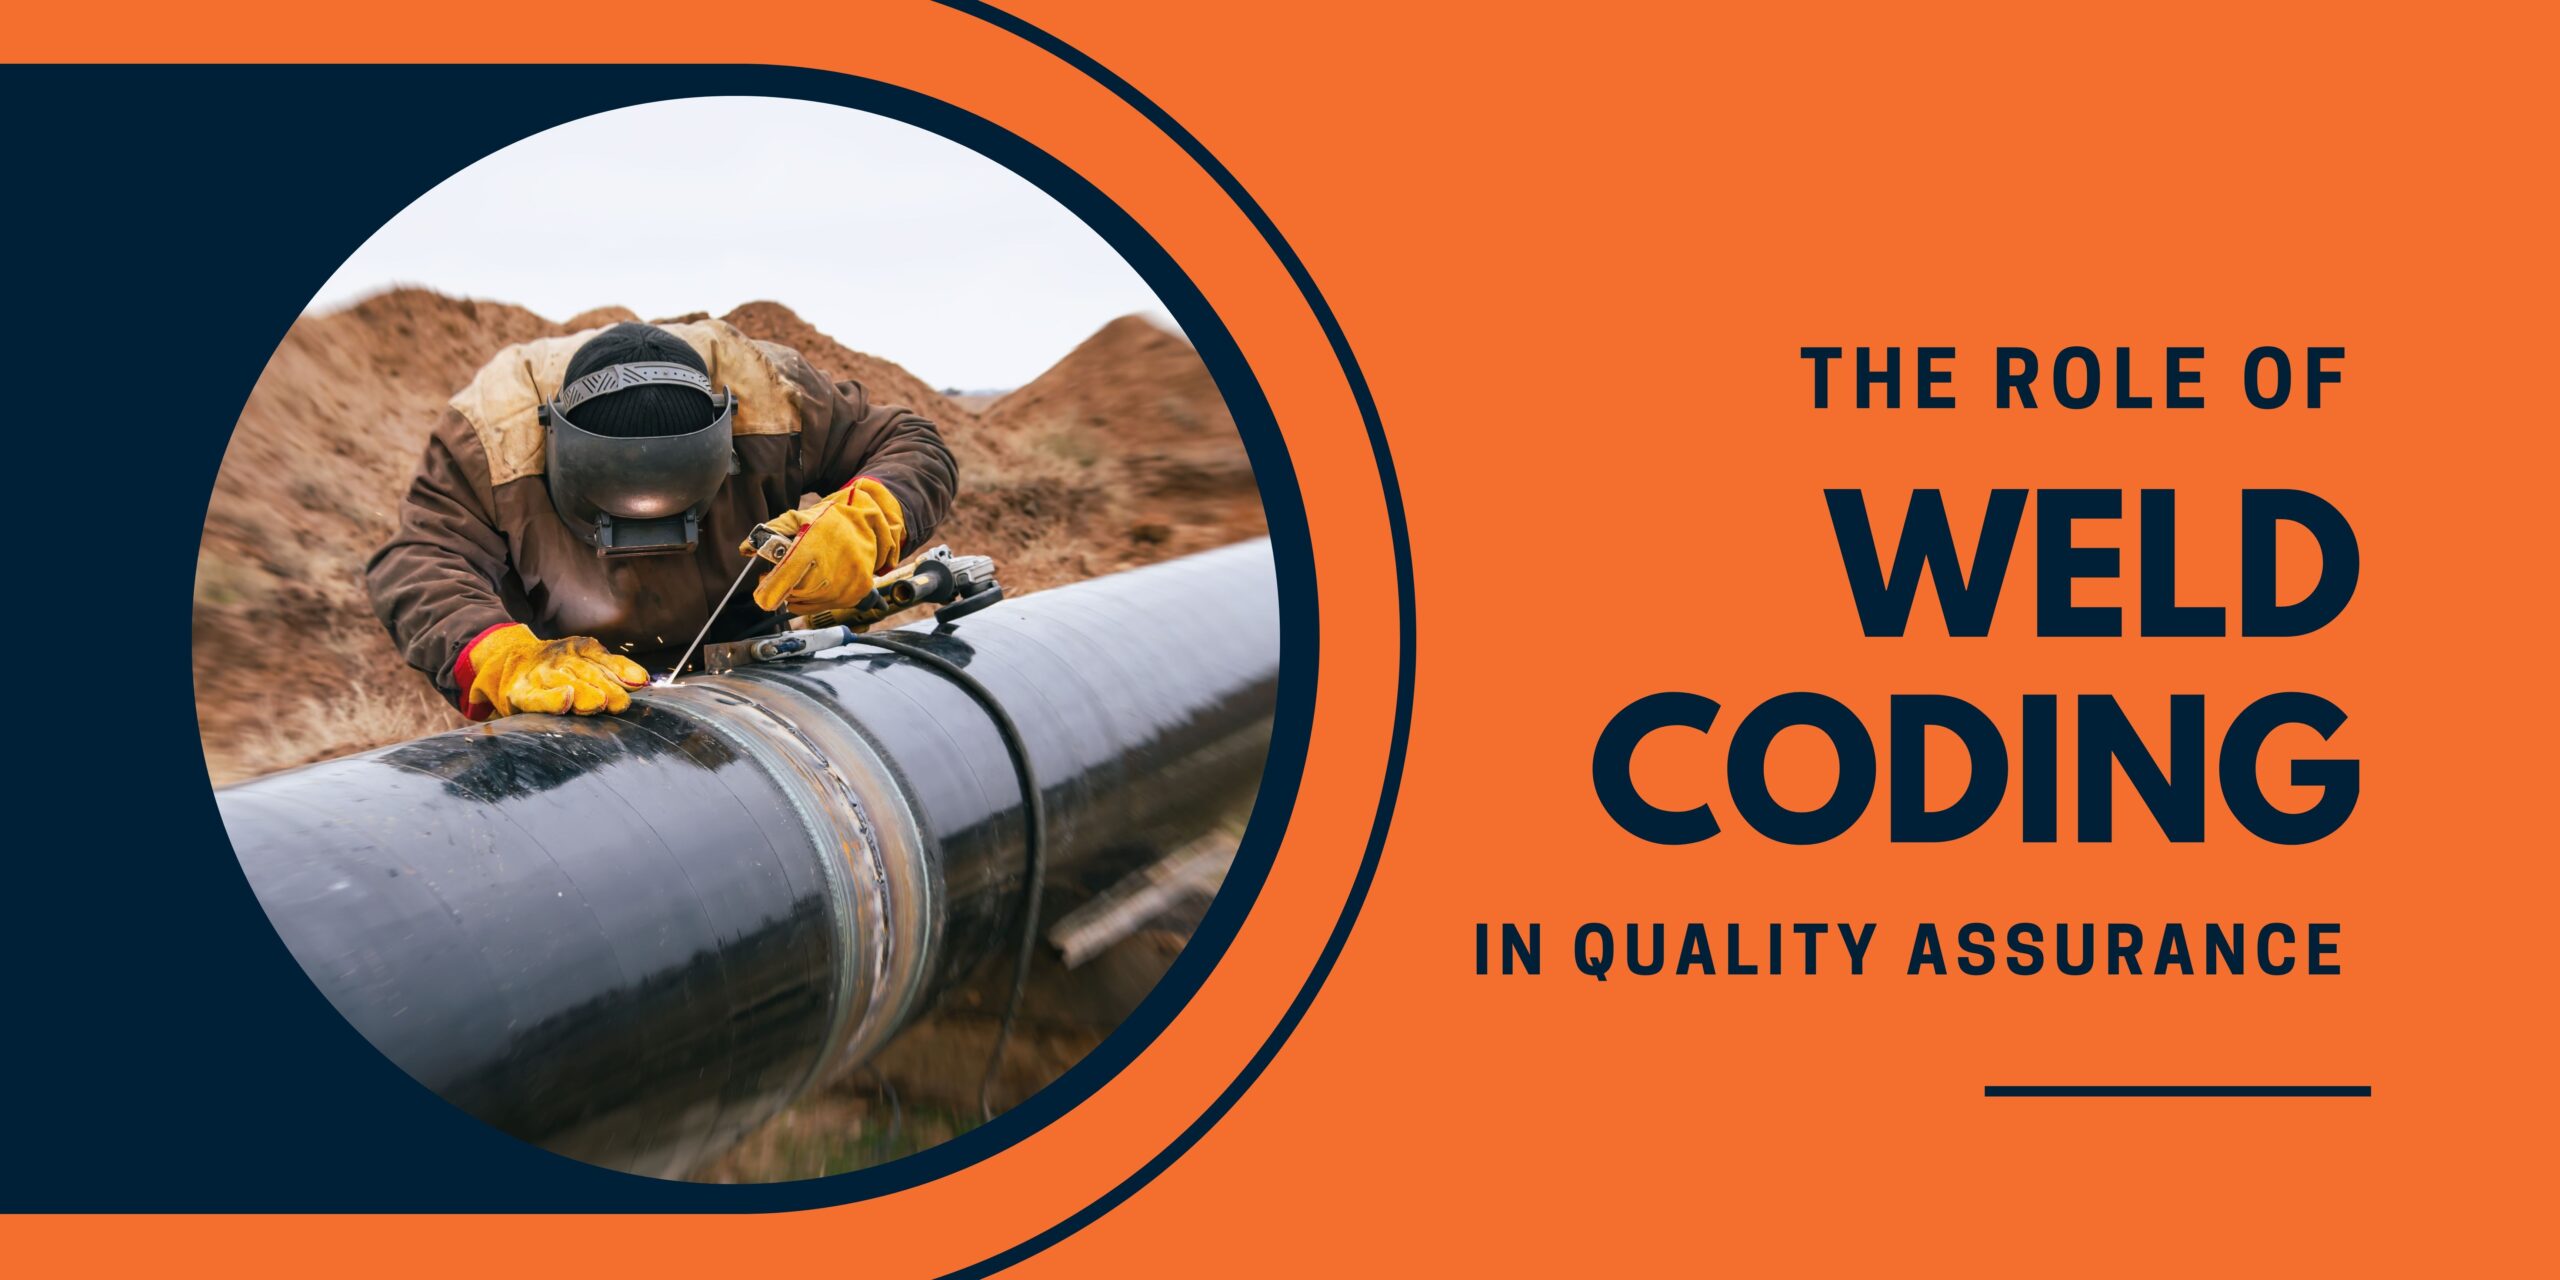 The Role of Weld Coding in Quality Assurance